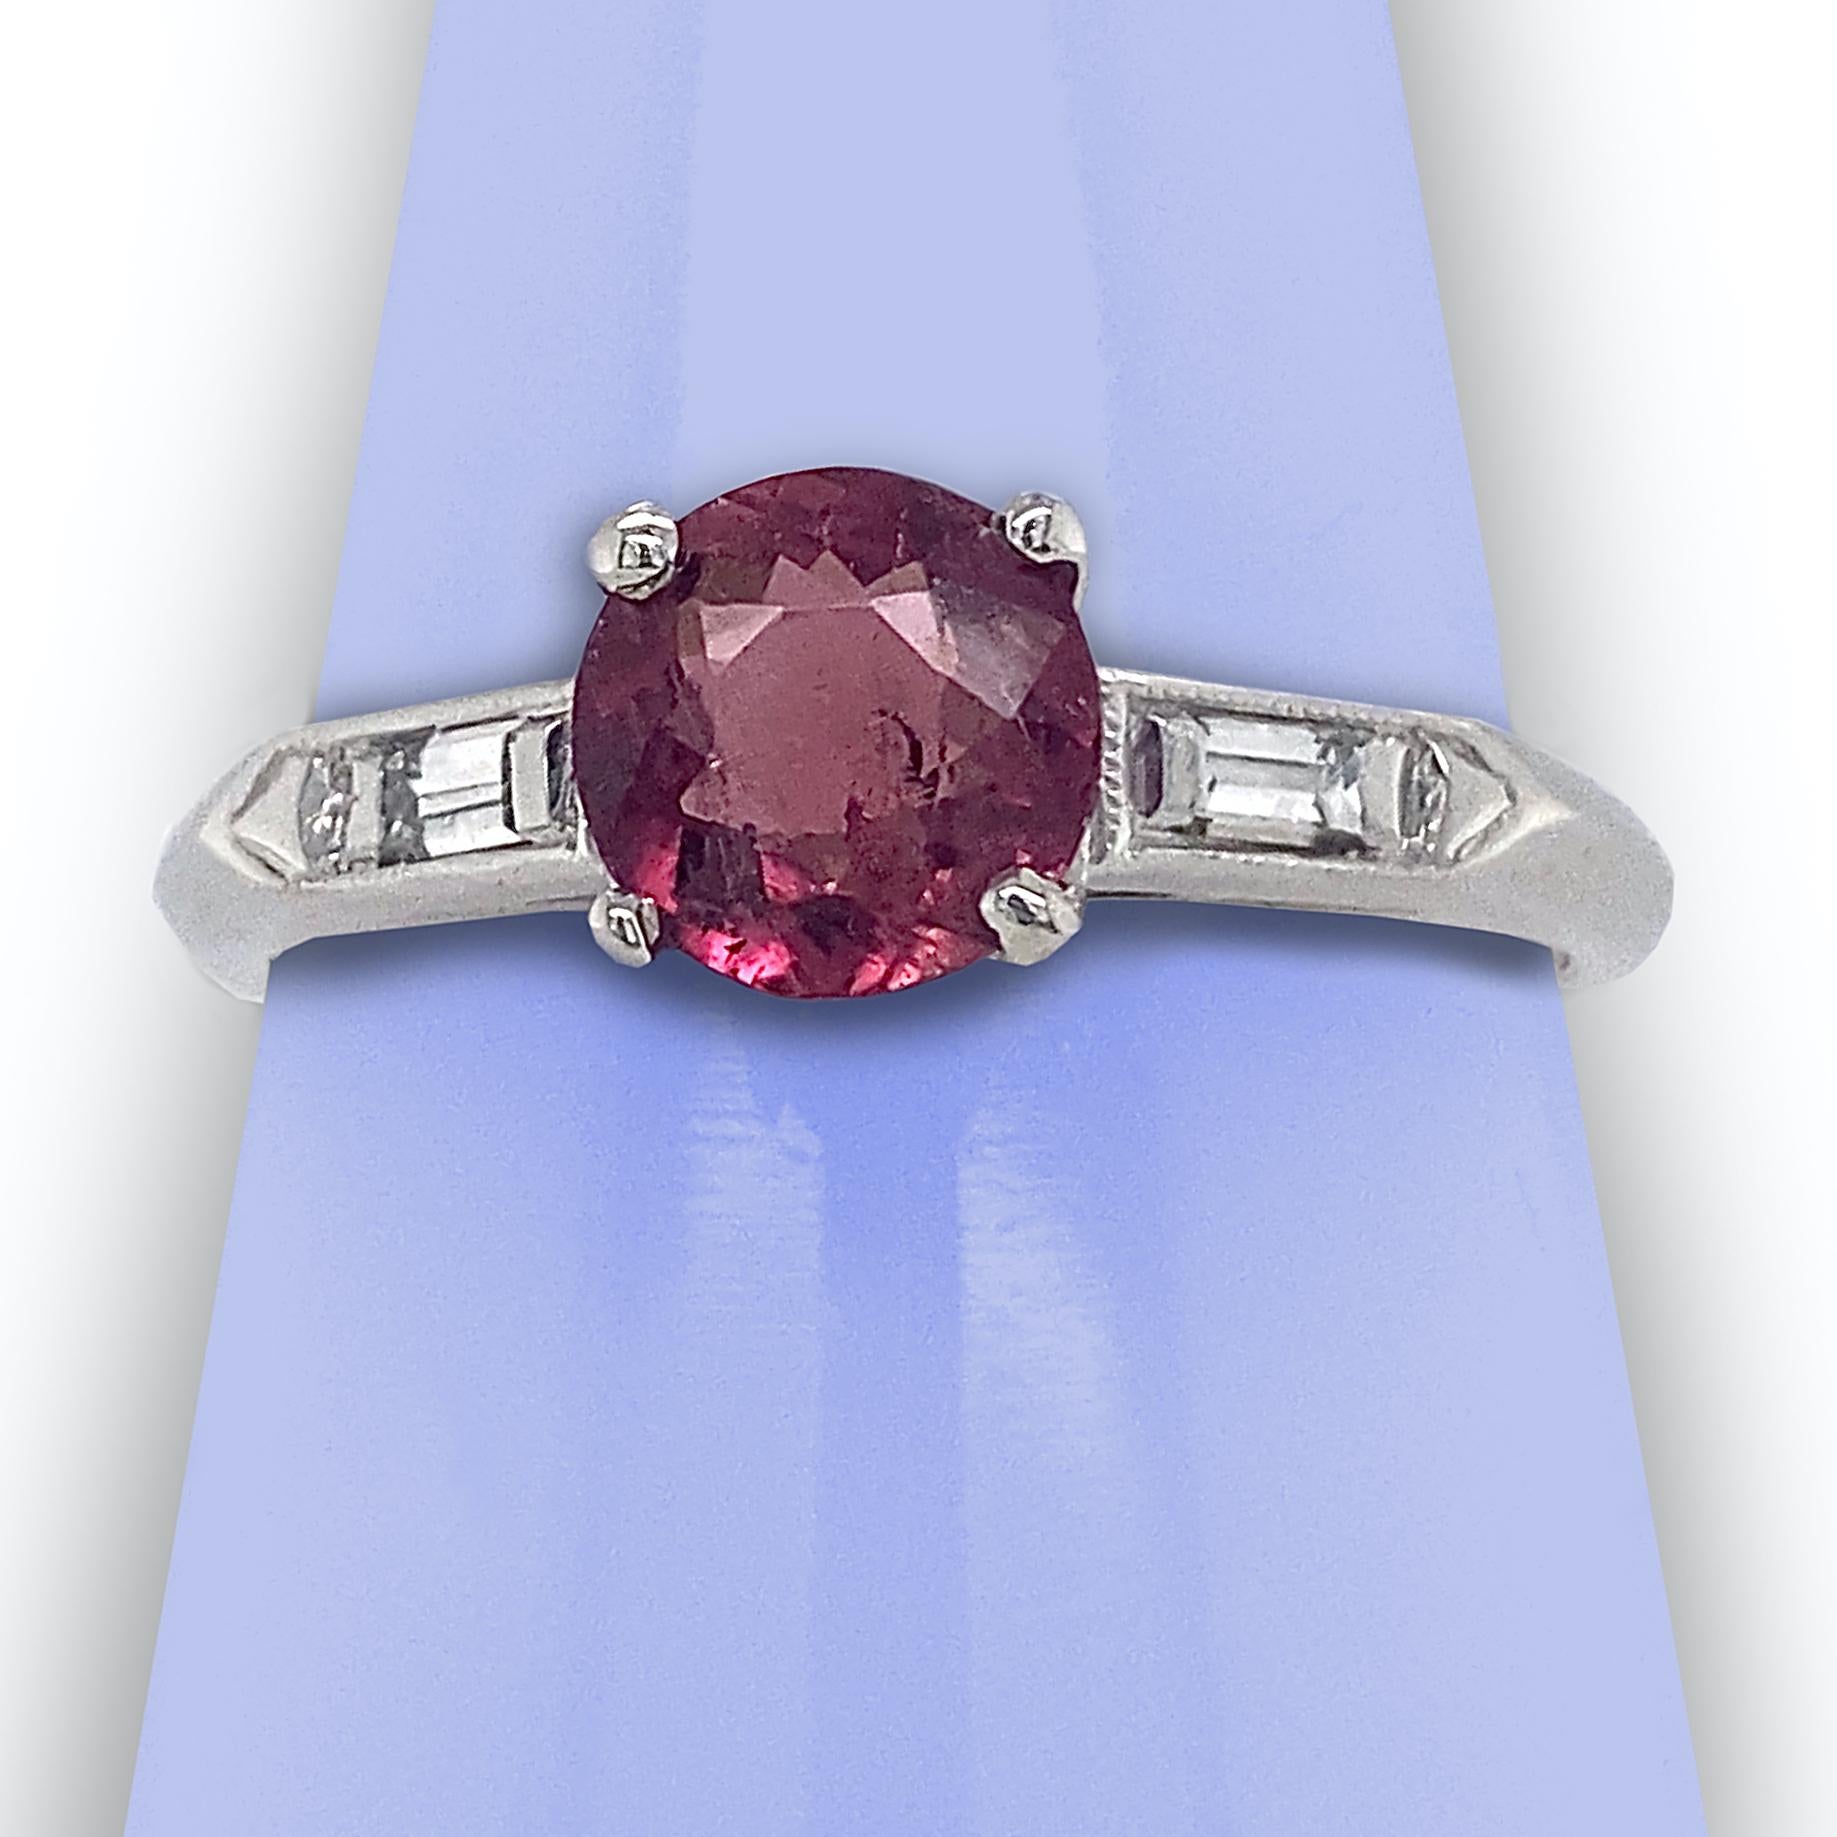 Mixed Cut Pink Tourmaline in Deco-Era Platinum Engagement Ring with Diamond Baguettes